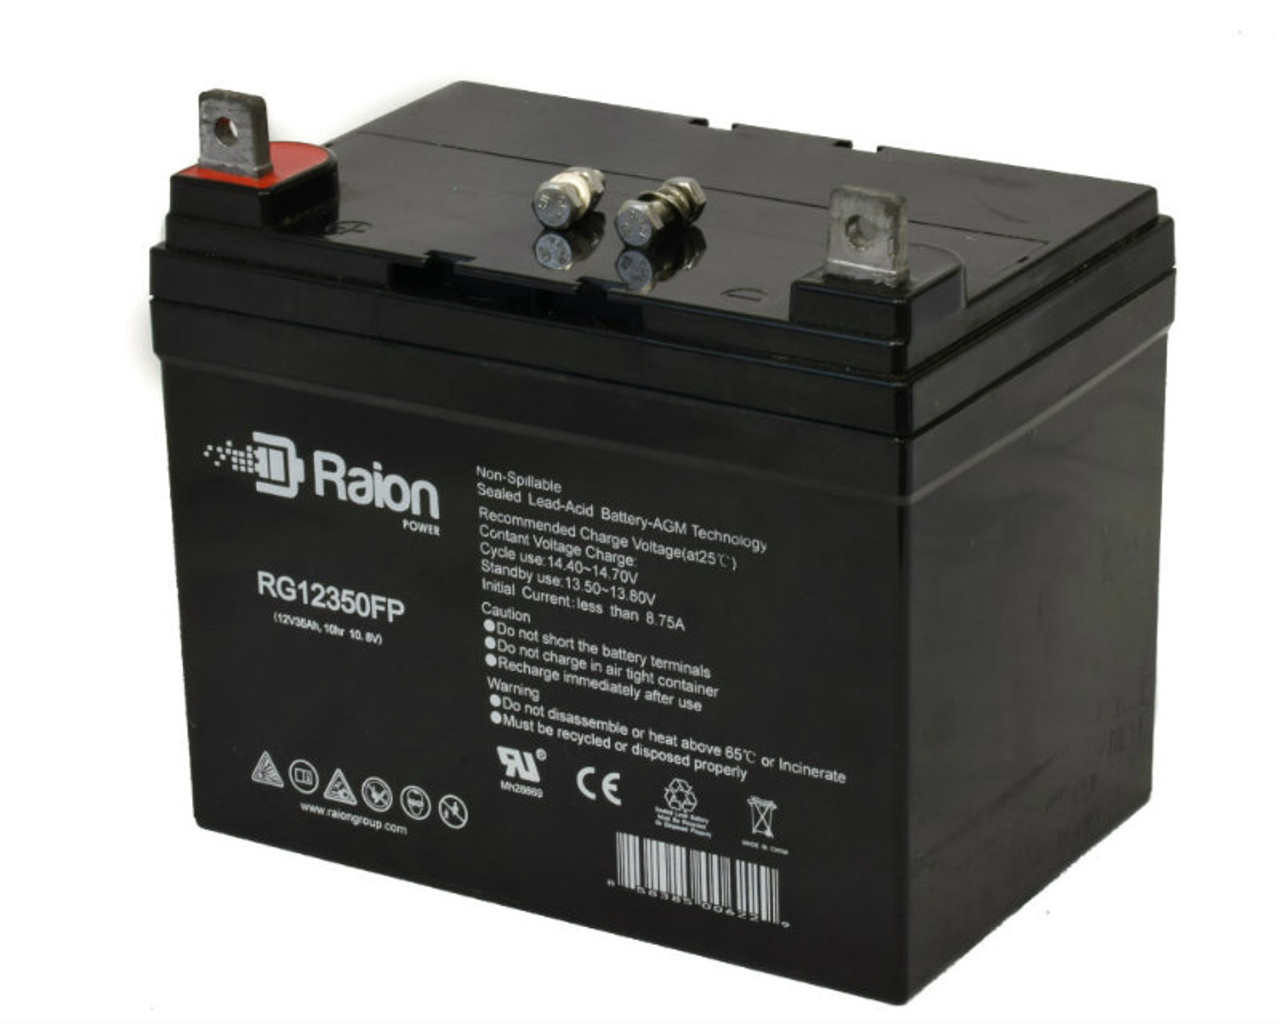 Raion Power Replacement 12V 35Ah RG12350FP Battery for Sabre (By John Deere) 1642HS